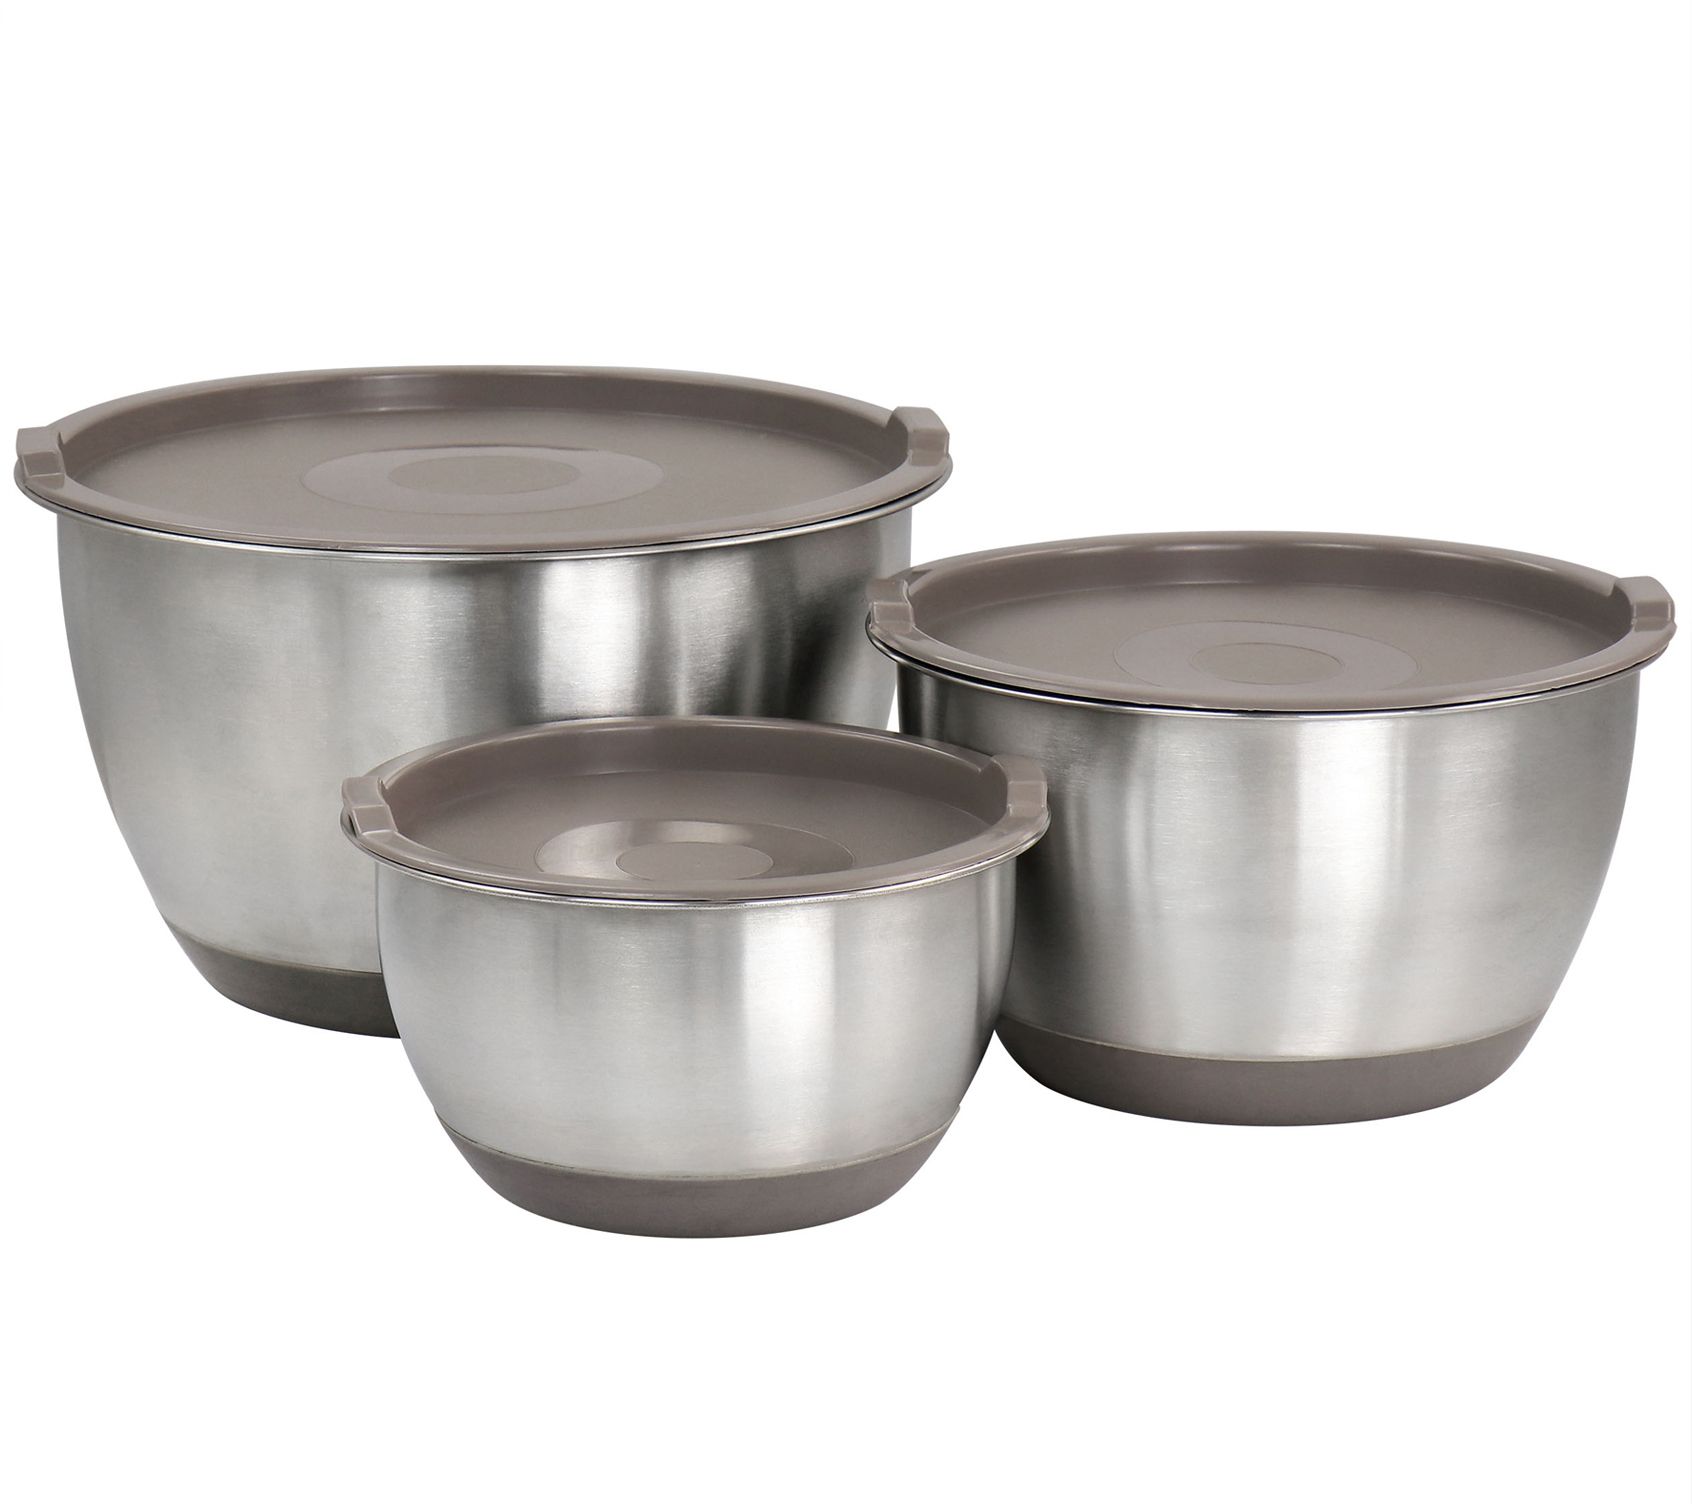 Martha Stewart 3 Piece Stainless Steel Mixing Bowl Set with Lids in Taupe